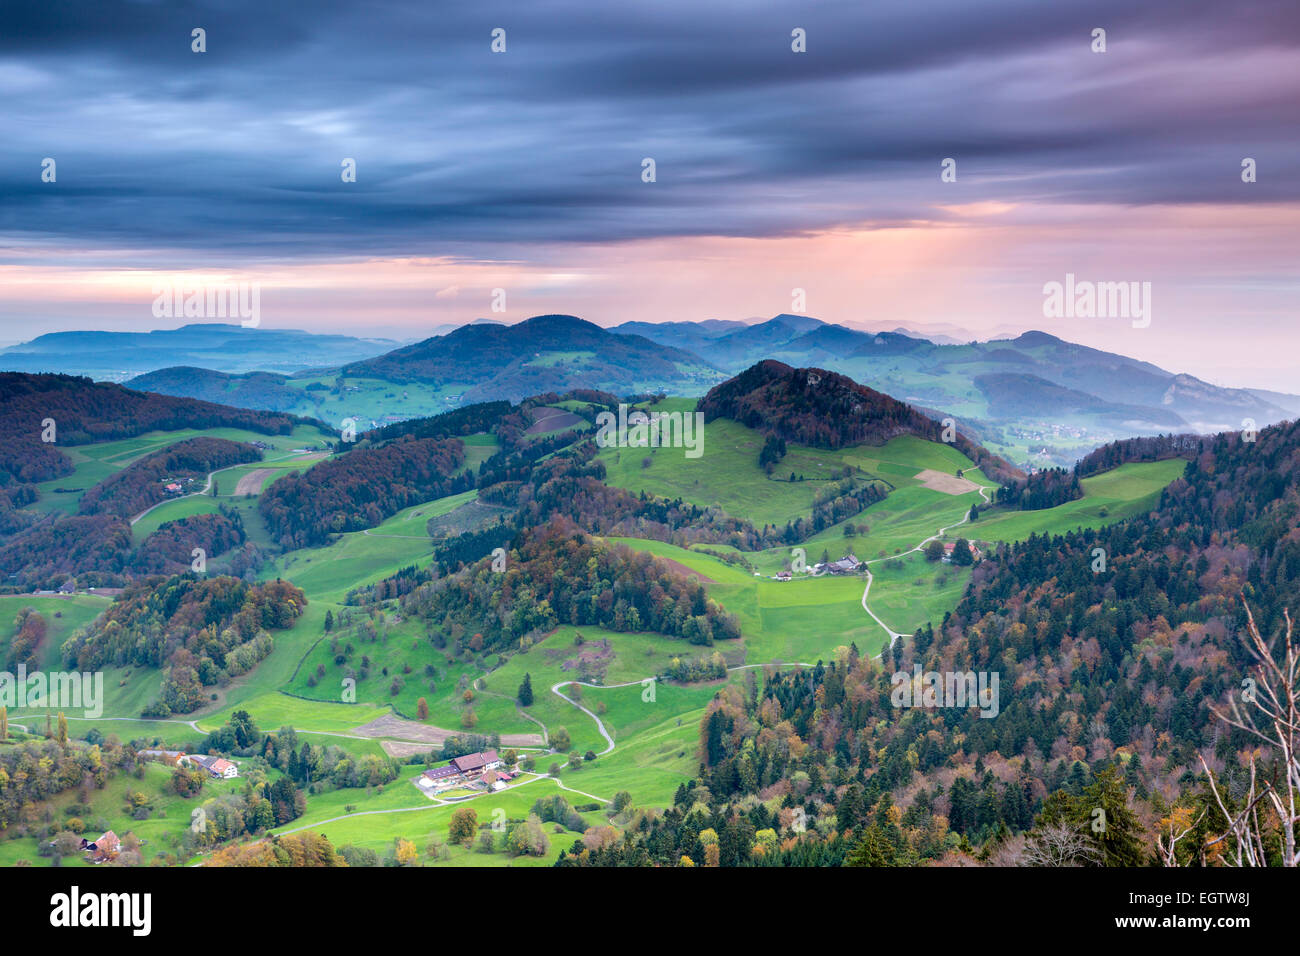 View from Belchenflue on the border of canton Basel-Landschaft and canton Solothurn in the Jura Mountains, Switzerland. Stock Photo